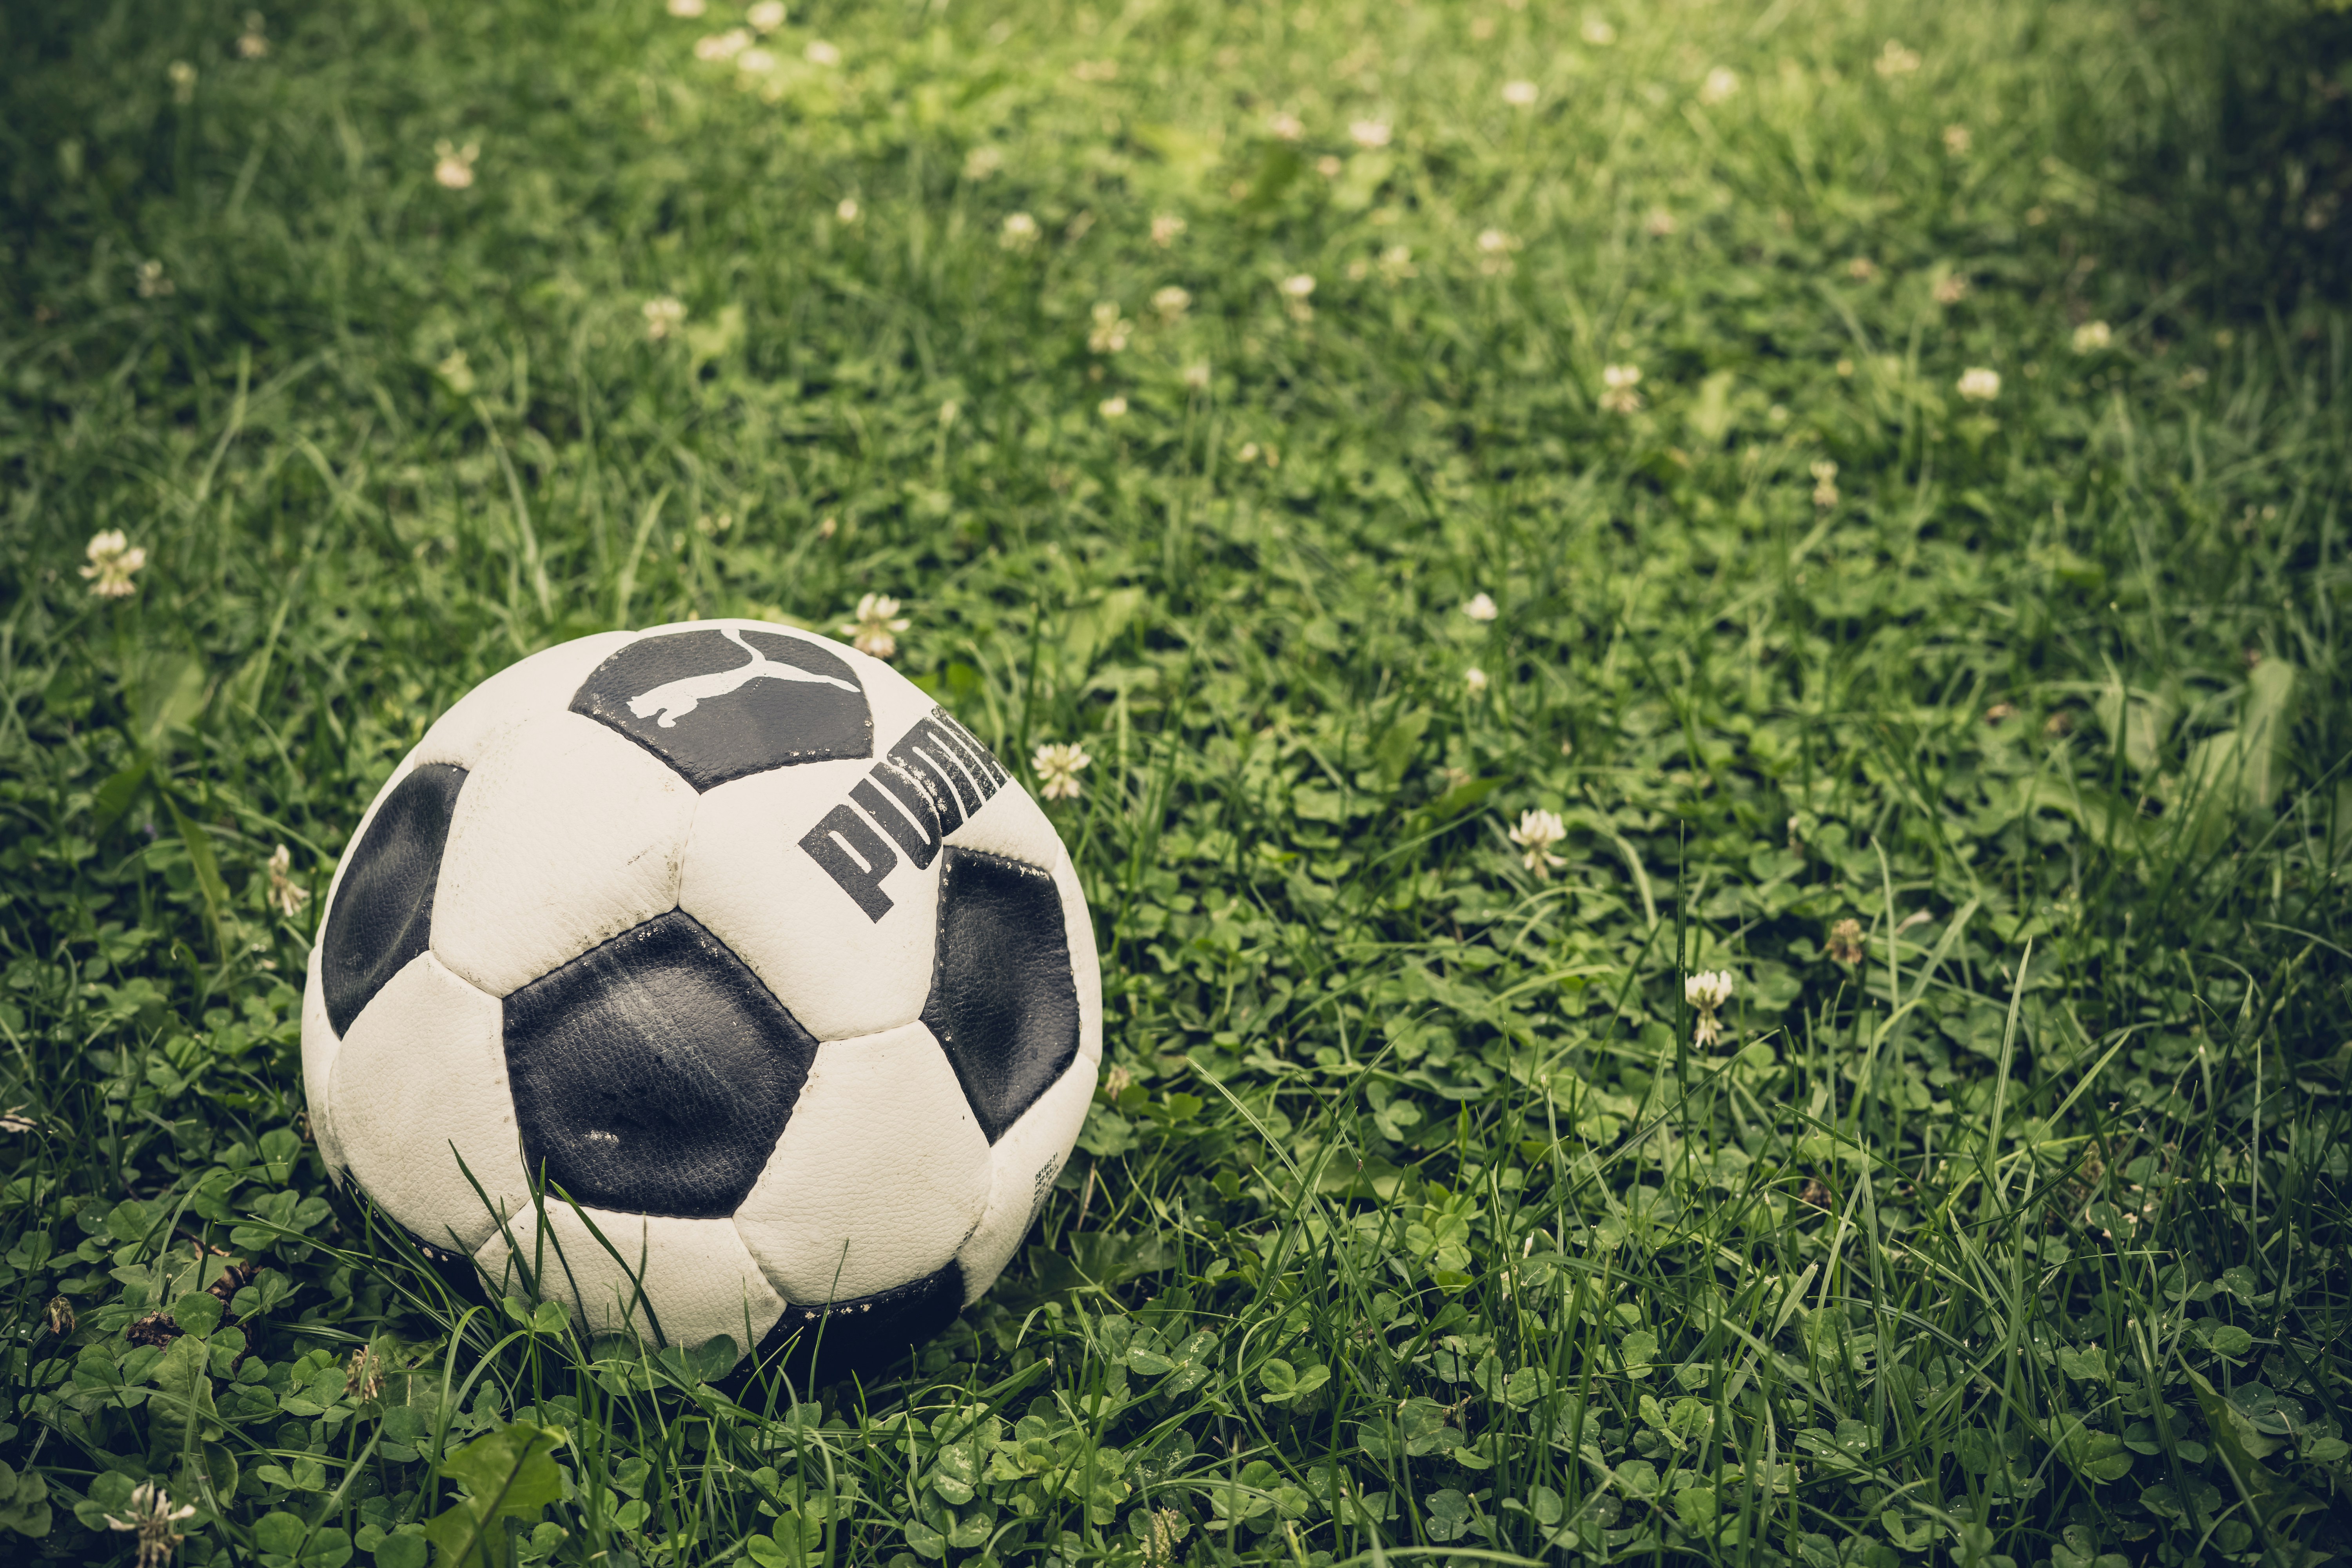 Old football lying in the grass.